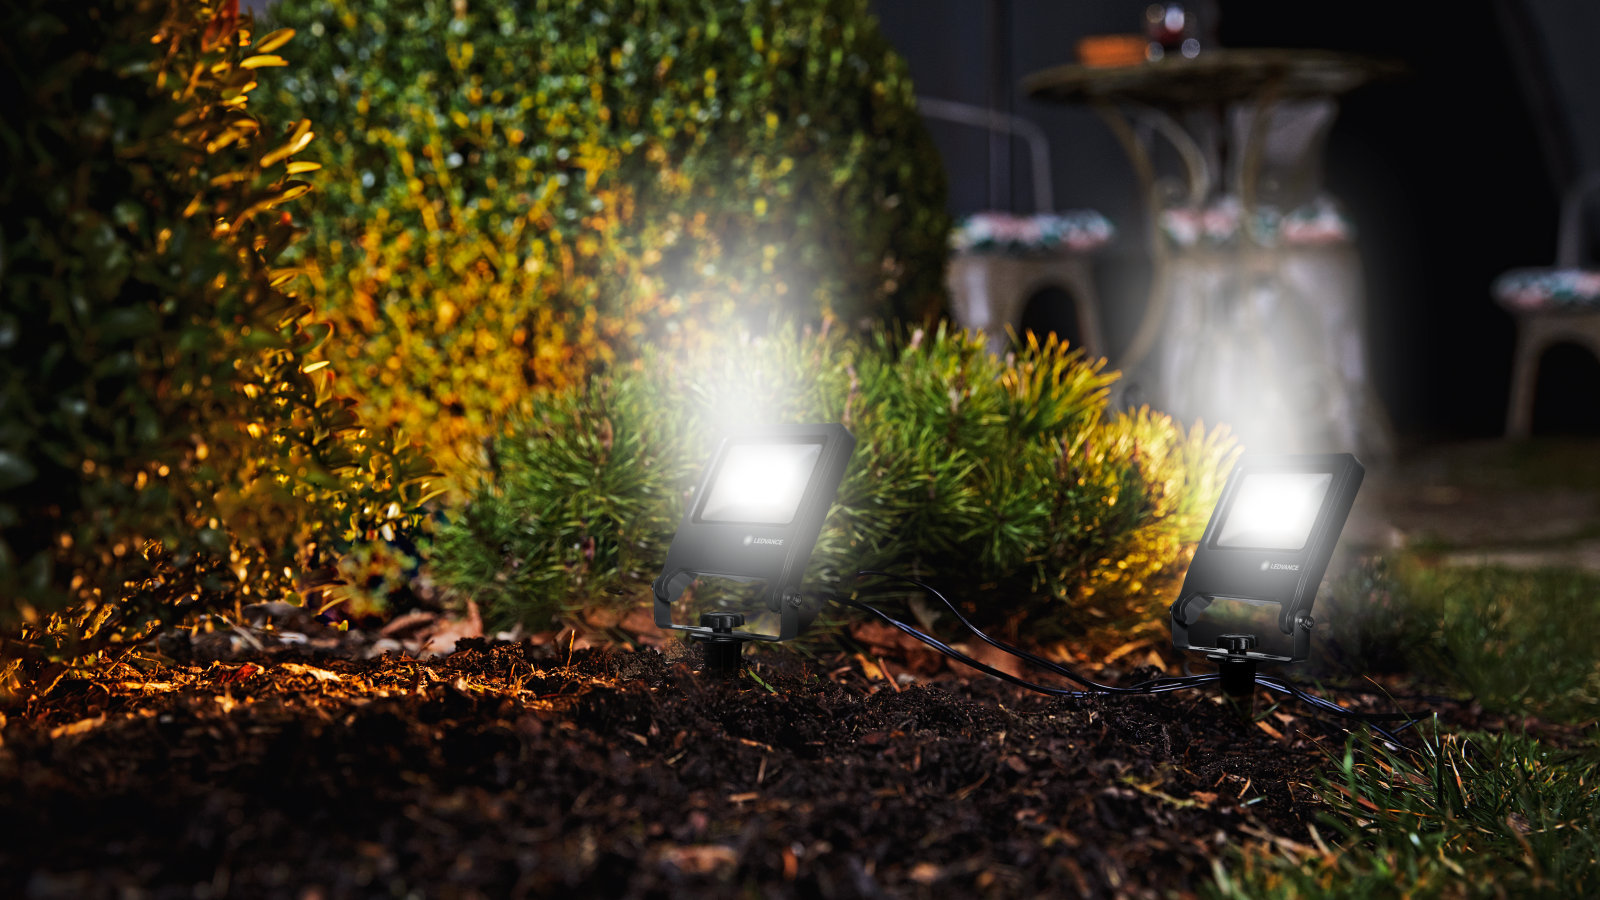 The time of year for exterior lighting is here!